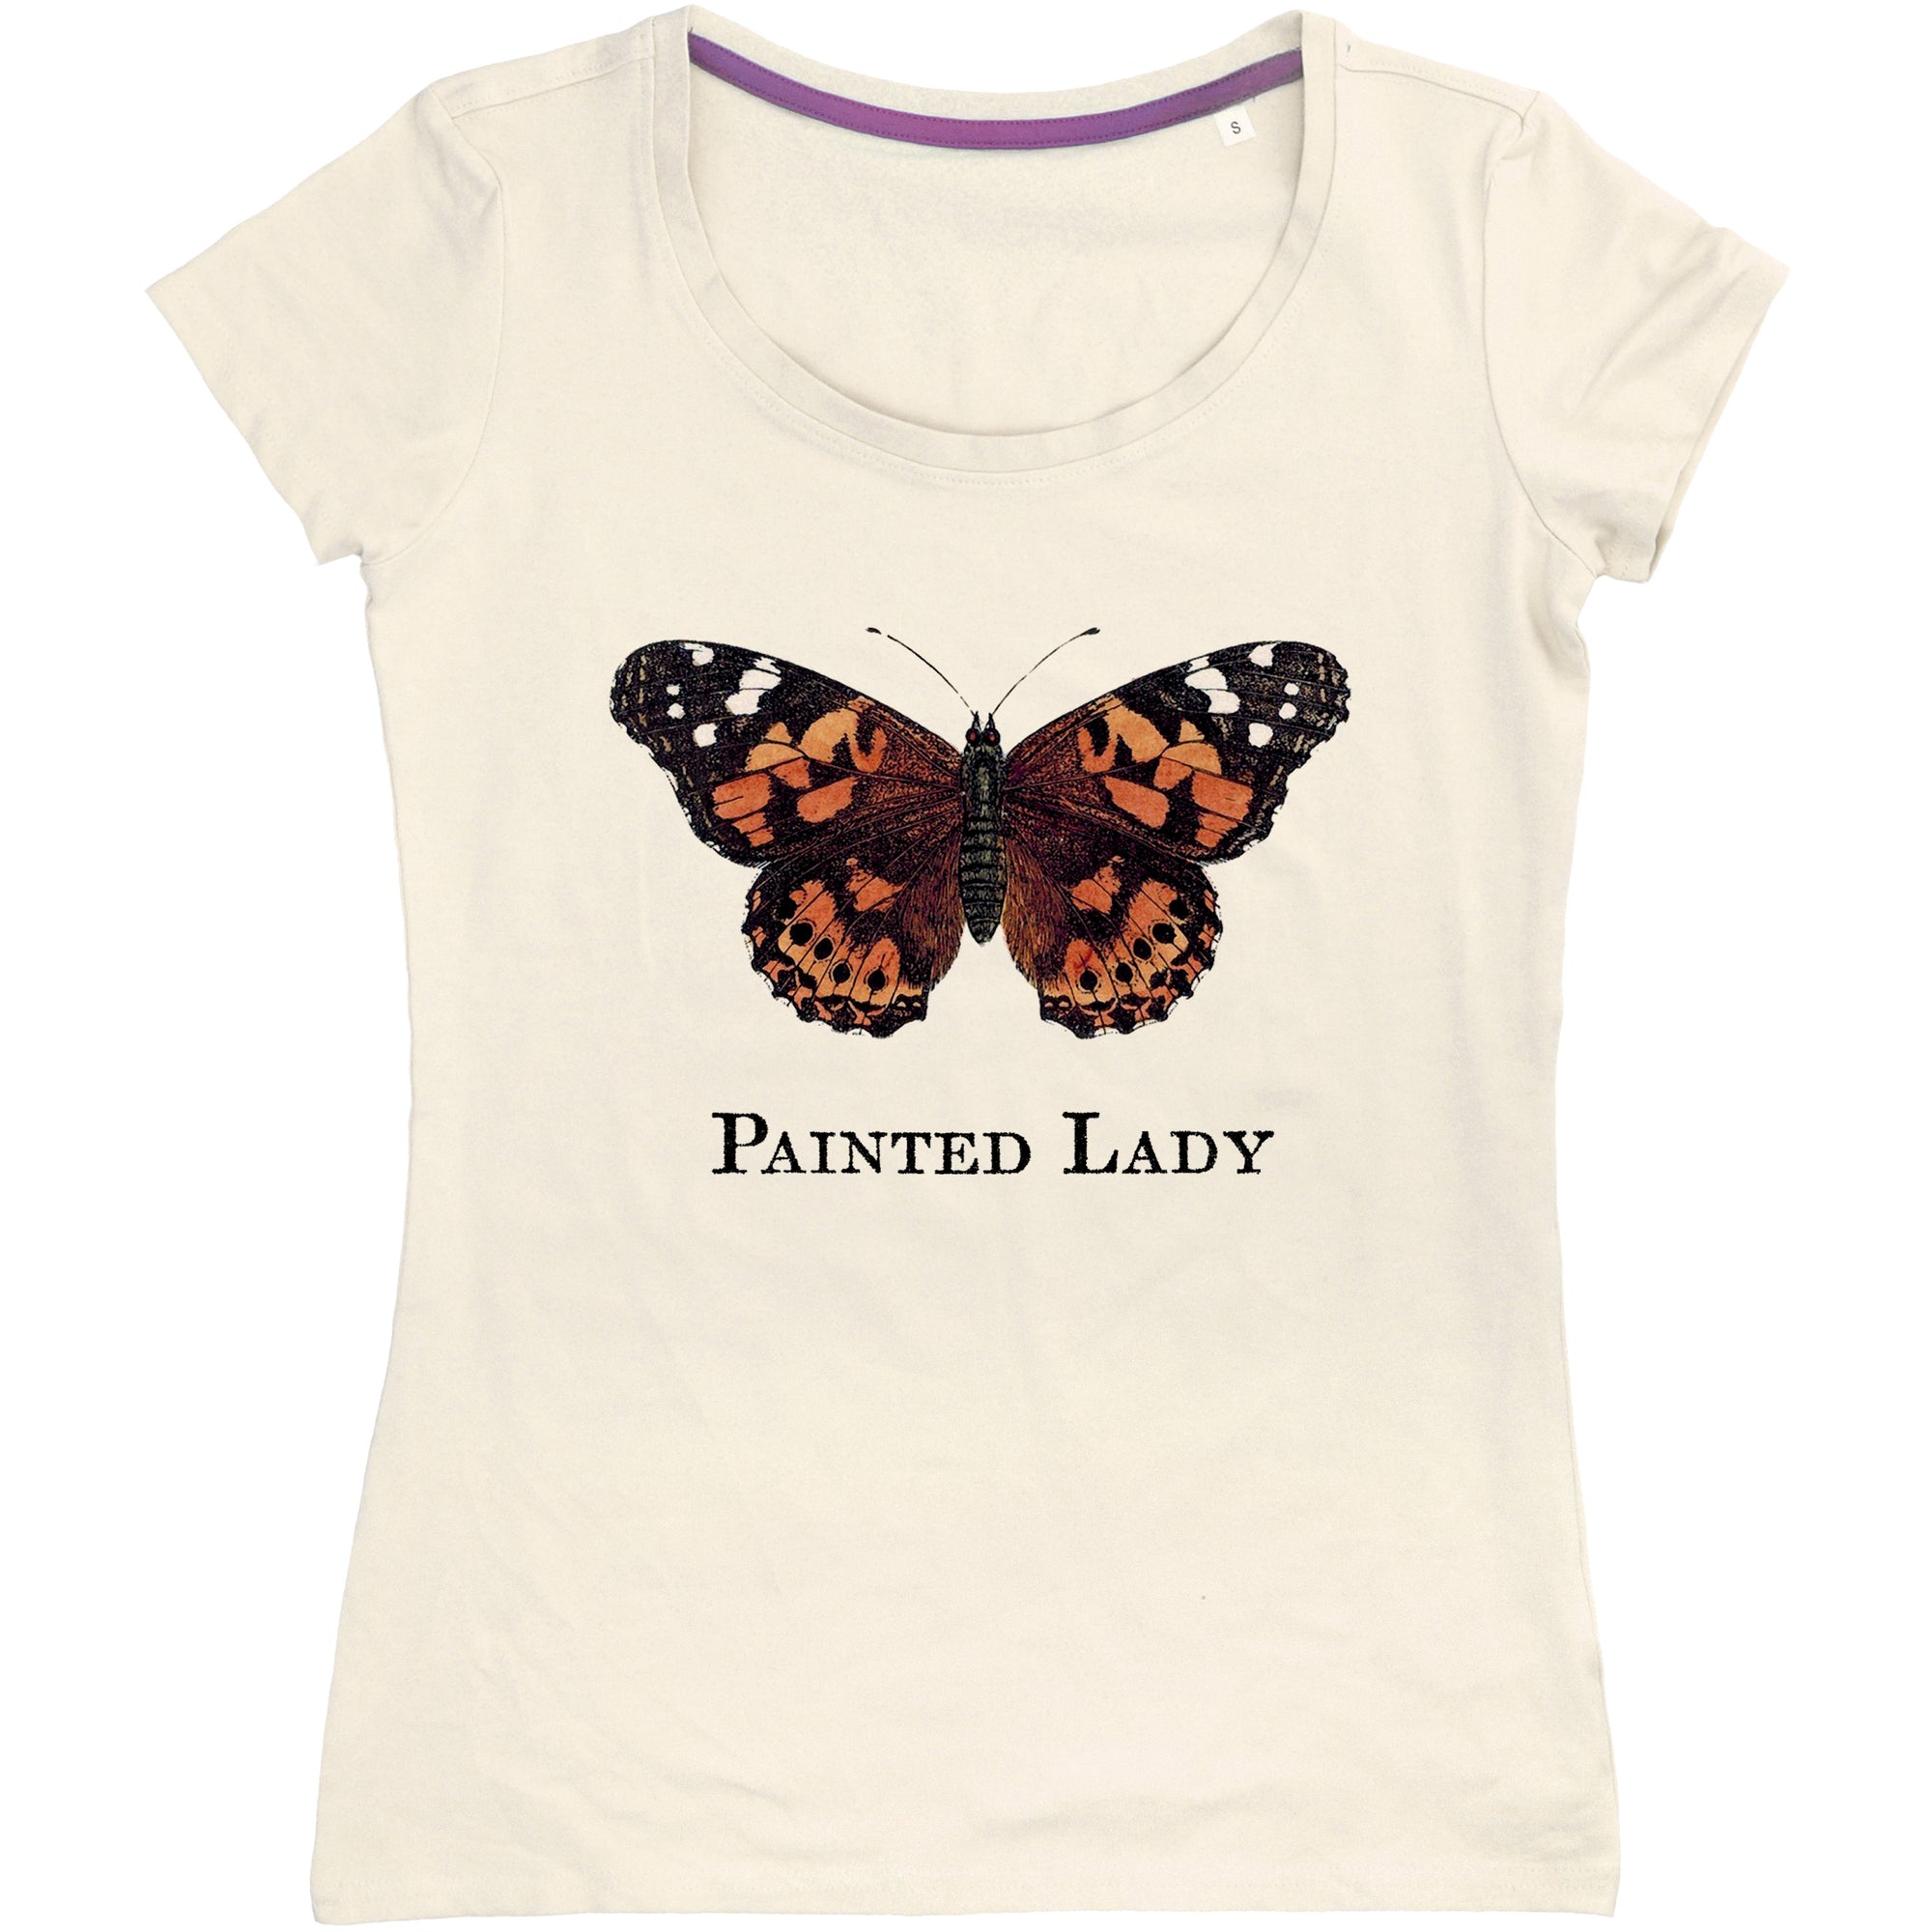 Painted Lady Women's T-shirt